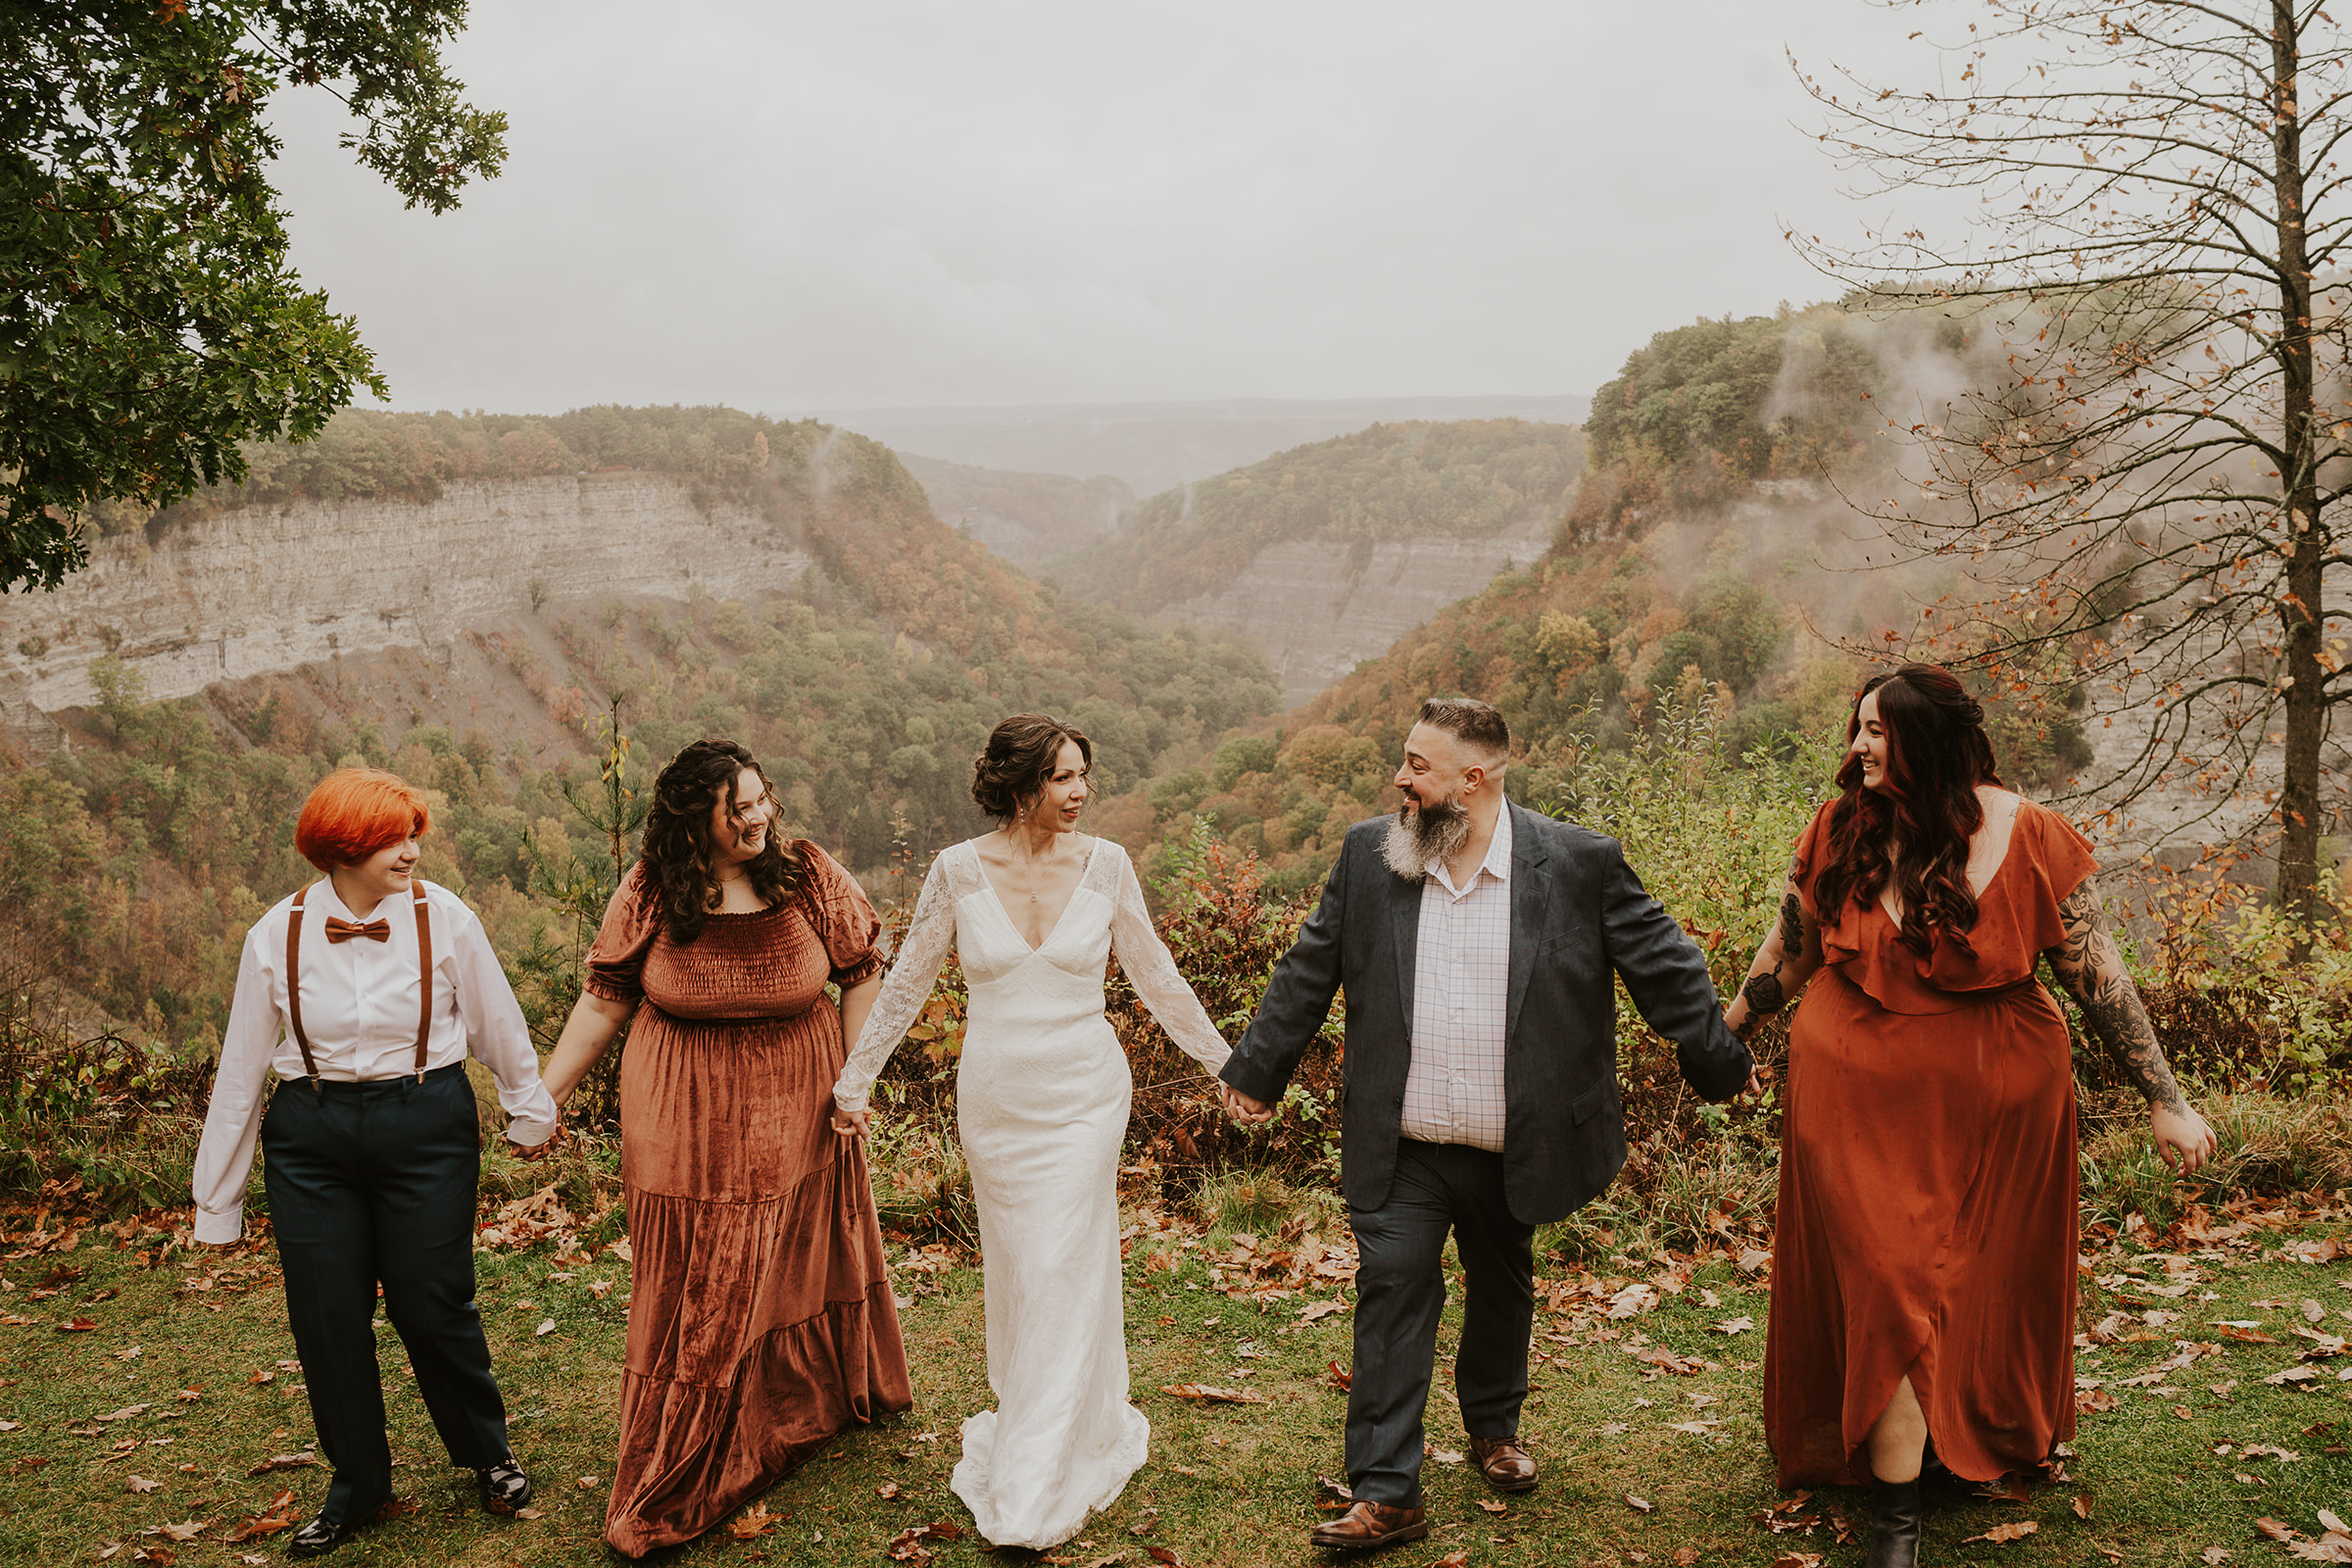 vow renewal at letchworth state park in upstate ny